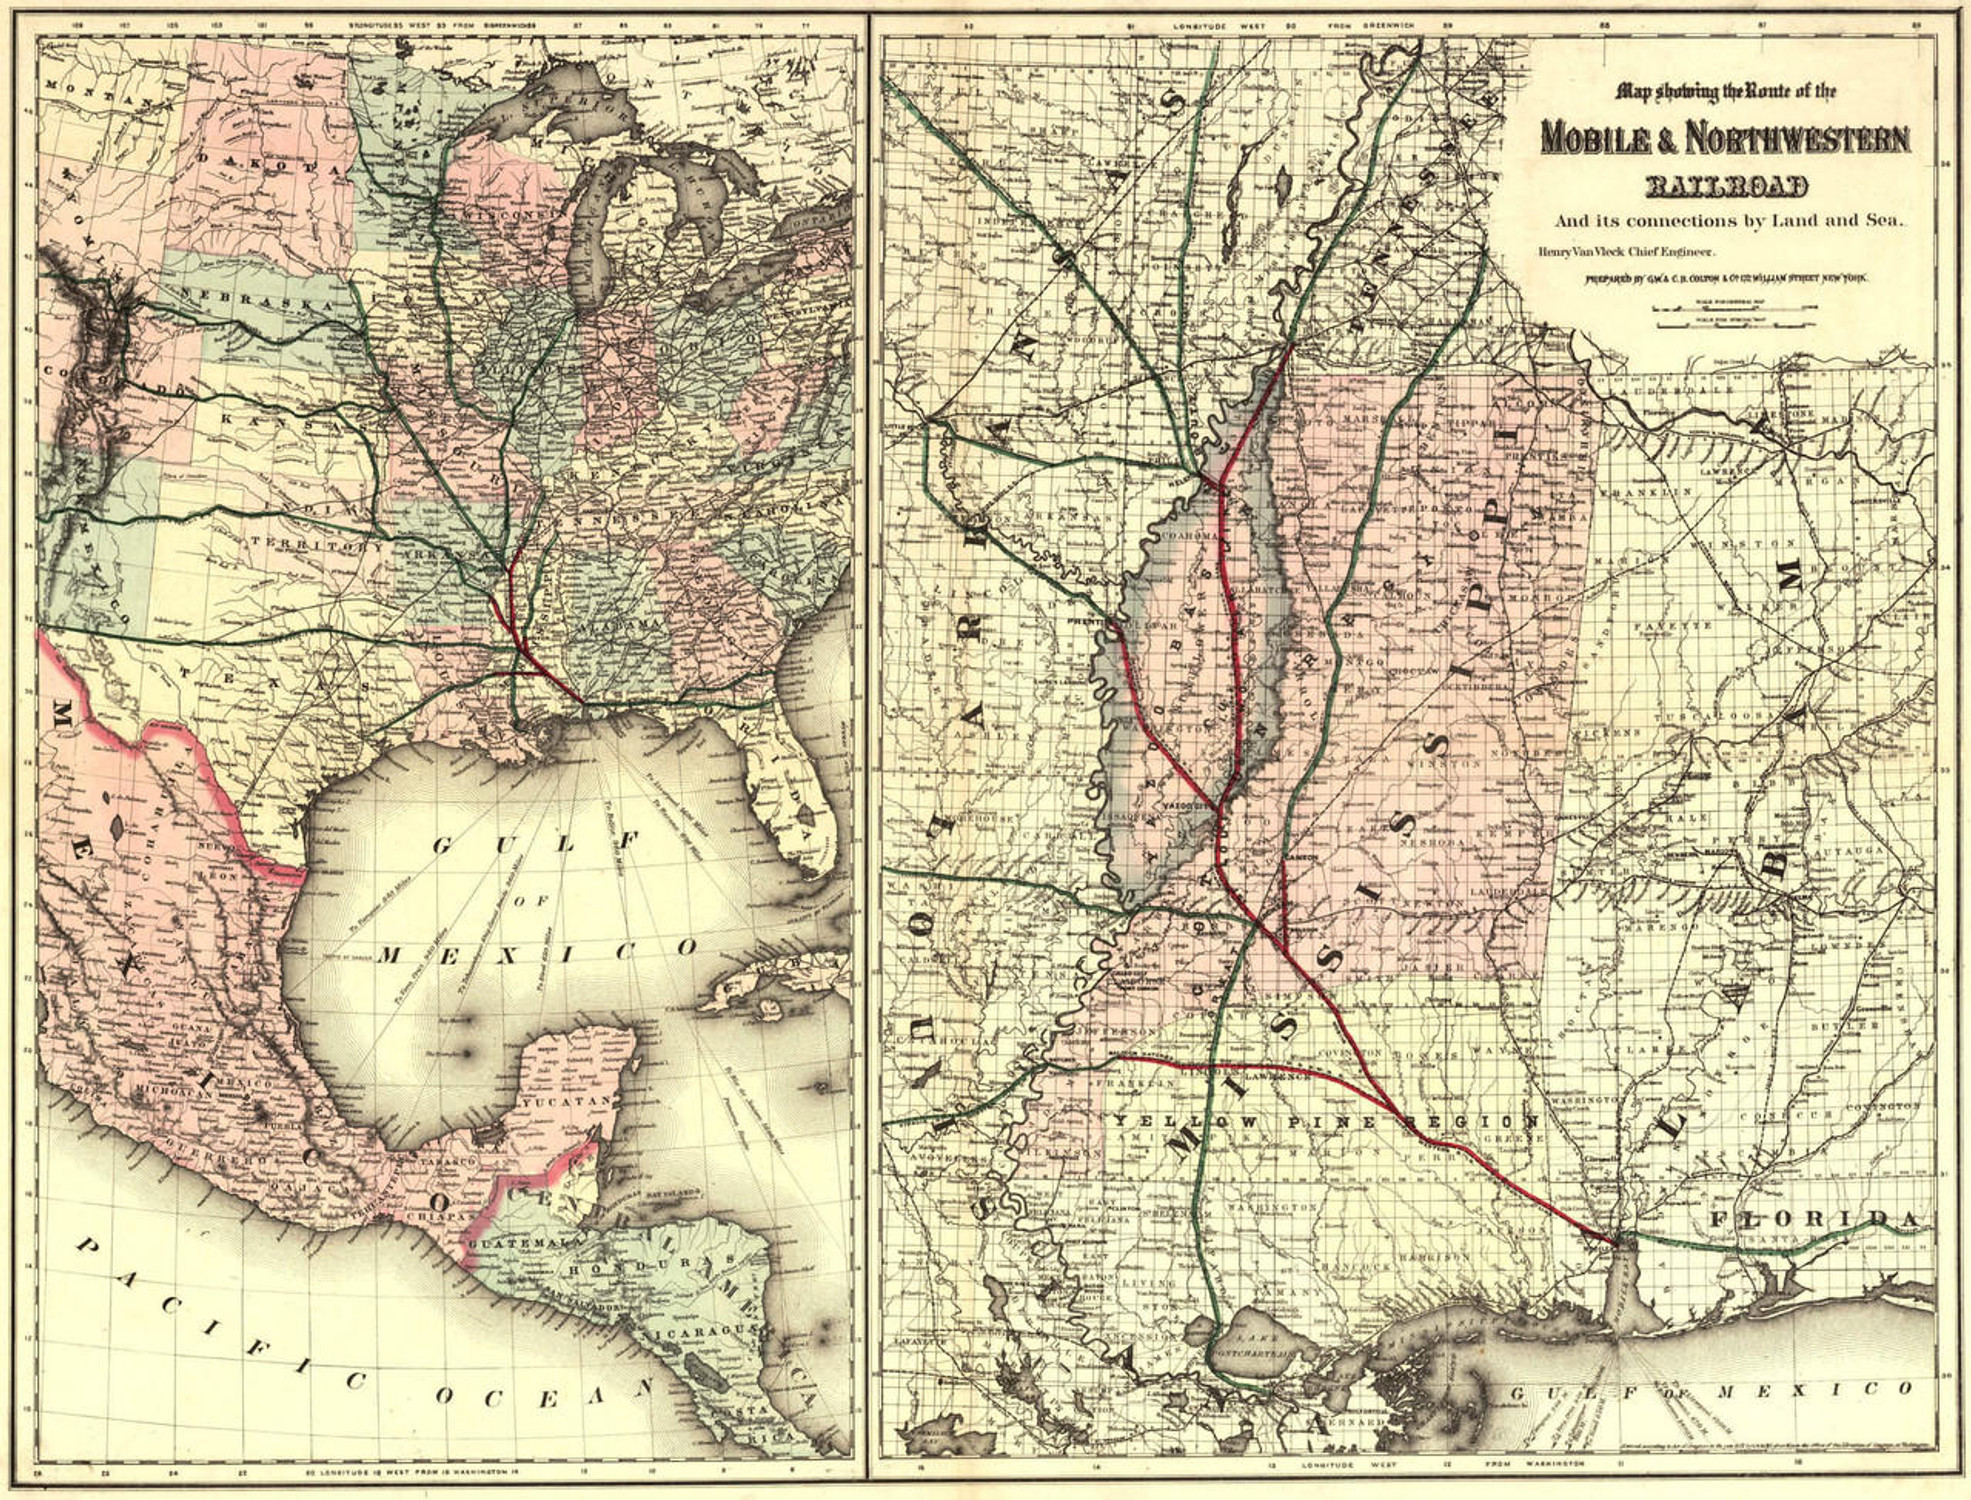 Historic Railroad Map of the Southern United States - 1871, image 1, World Maps Online